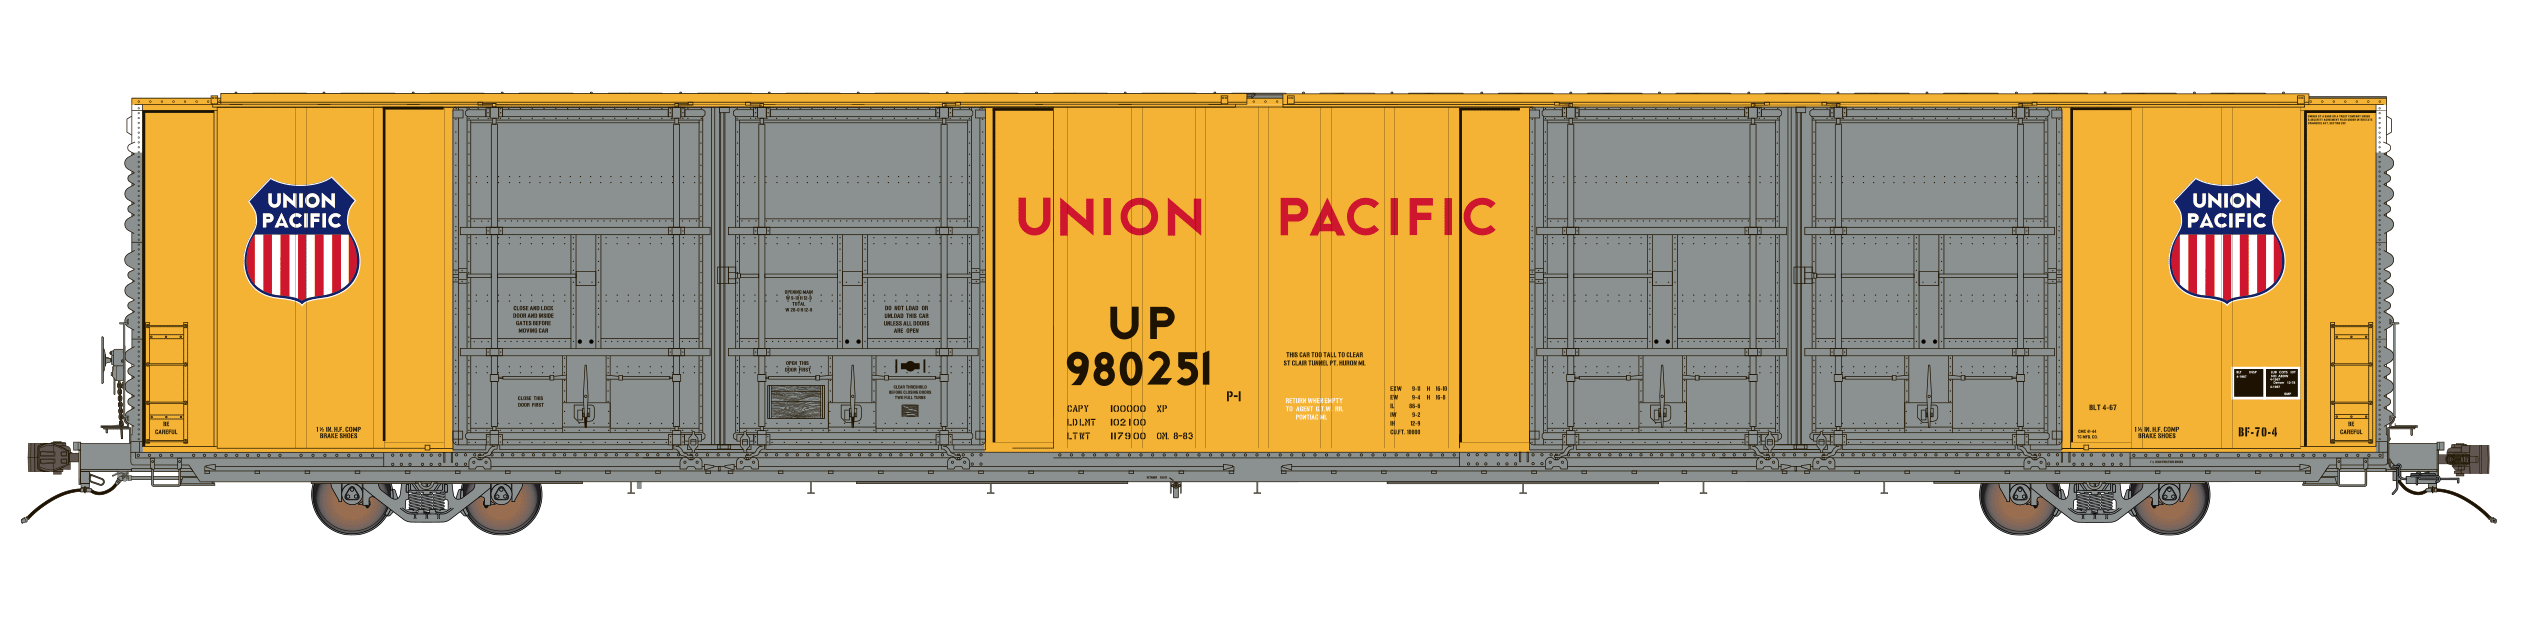 Class One Model Works FC00427 HO Scale Thrall 86' 8 Door Boxcar Union Pacific UP 980251